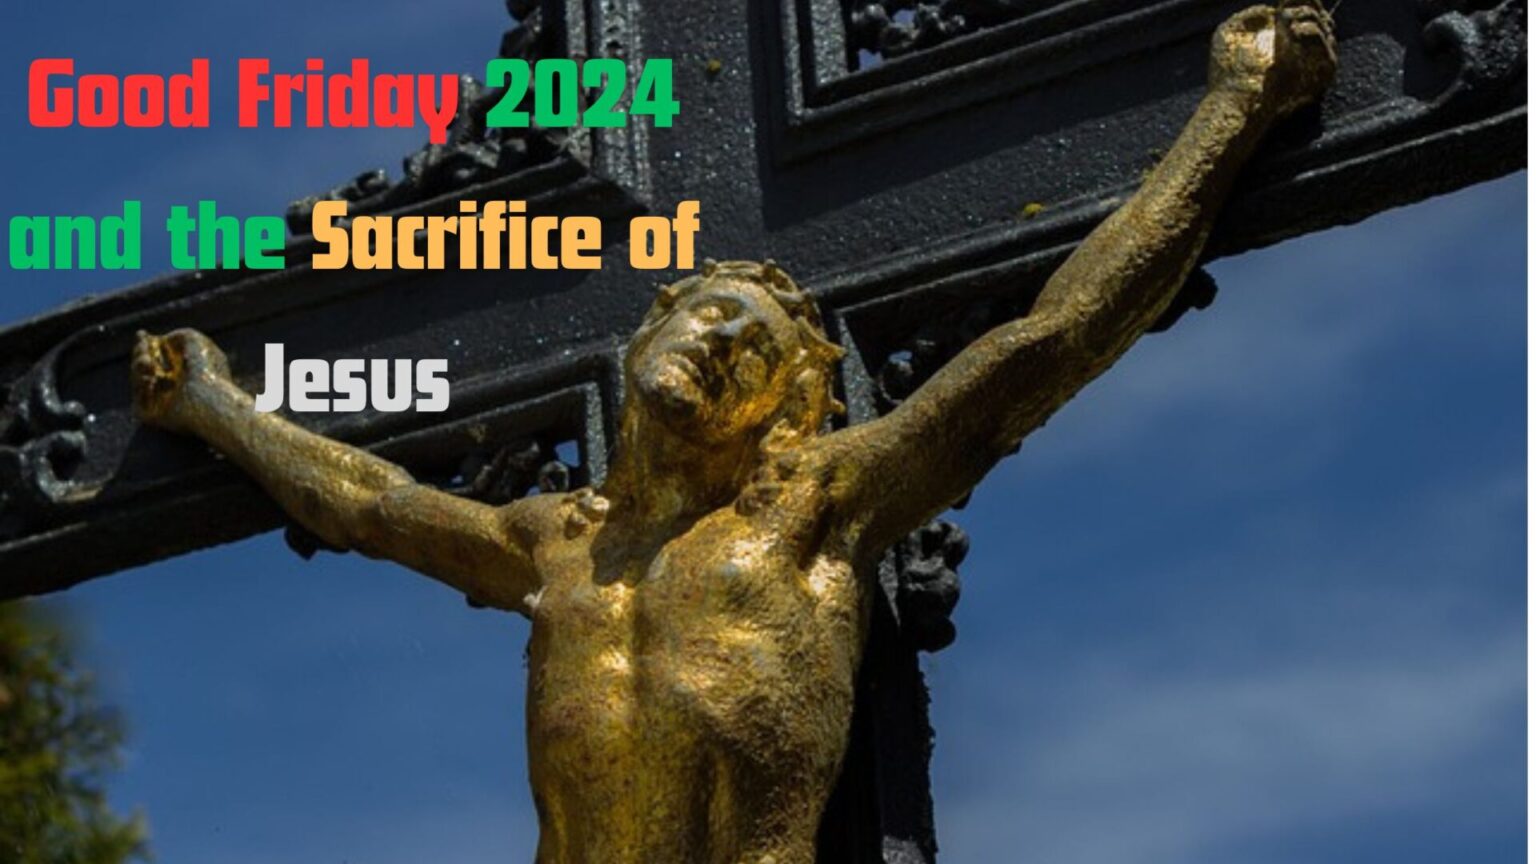 Contemplating Redemption: Good Friday 2024 and the Sacrifice of Jesus